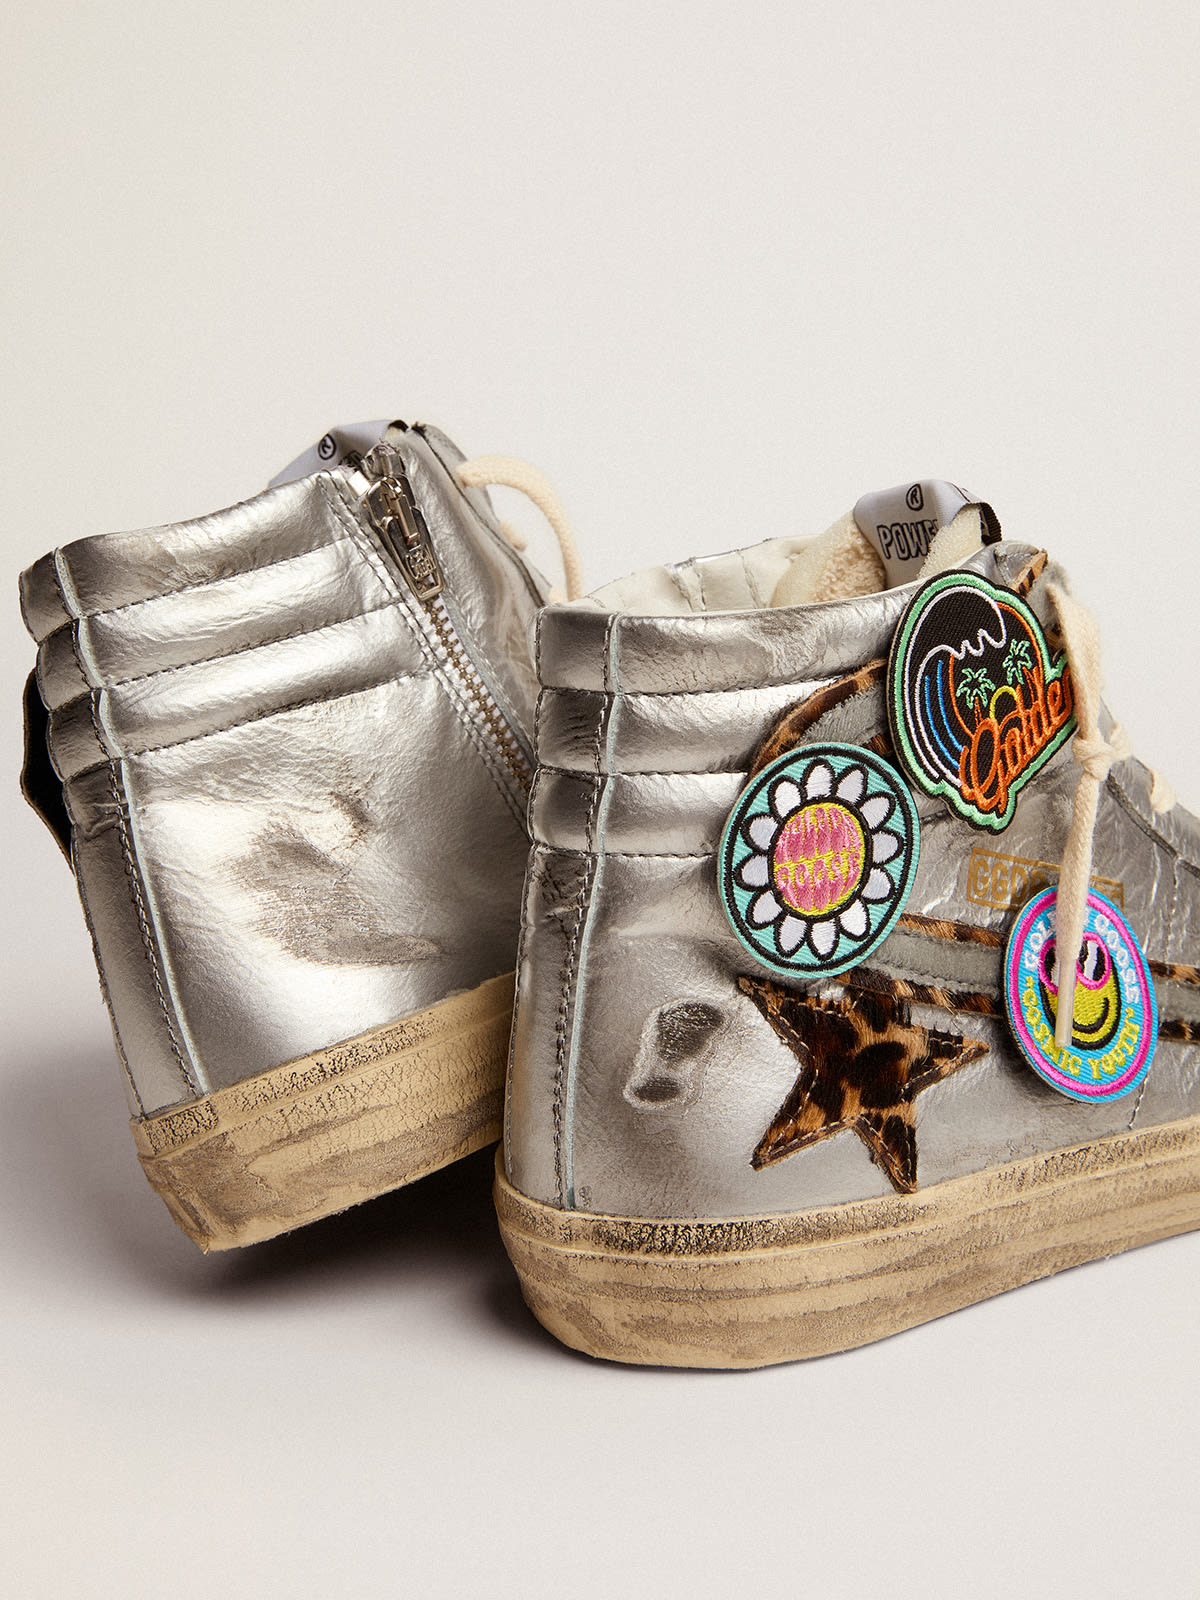 Golden Goose - Slide sneakers in silver laminated leather with leopard-print pony skin star and flash with detachable multicolored patches in 